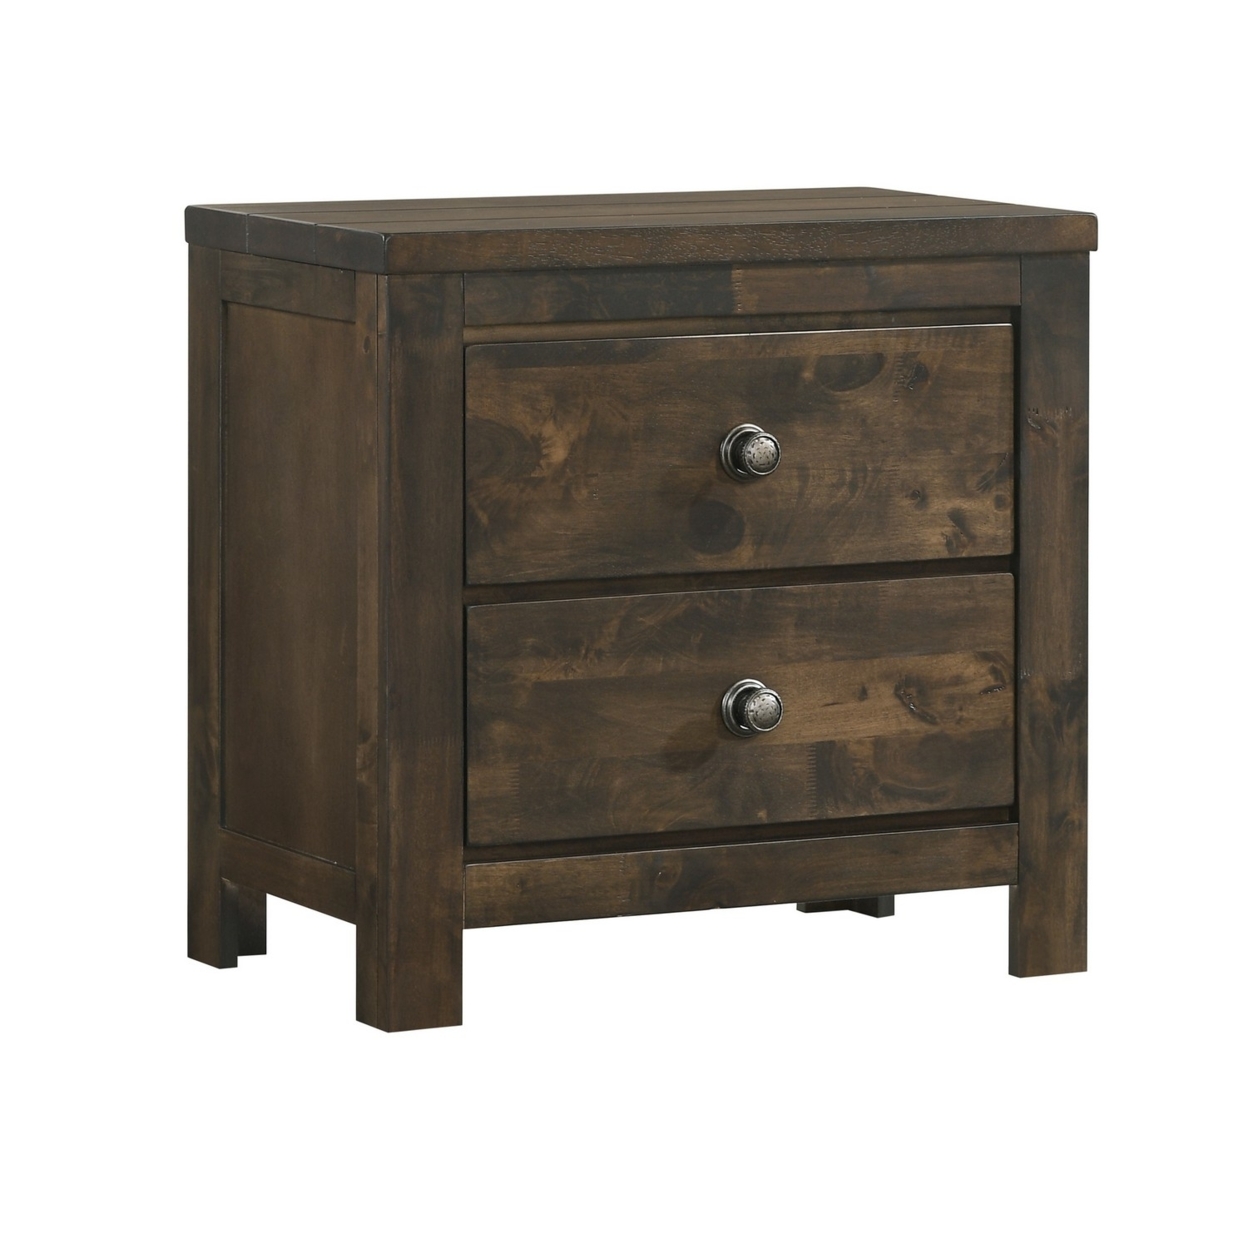 2 Drawer Transitional Style Nightstand With Texture Details, Brown- Saltoro Sherpi